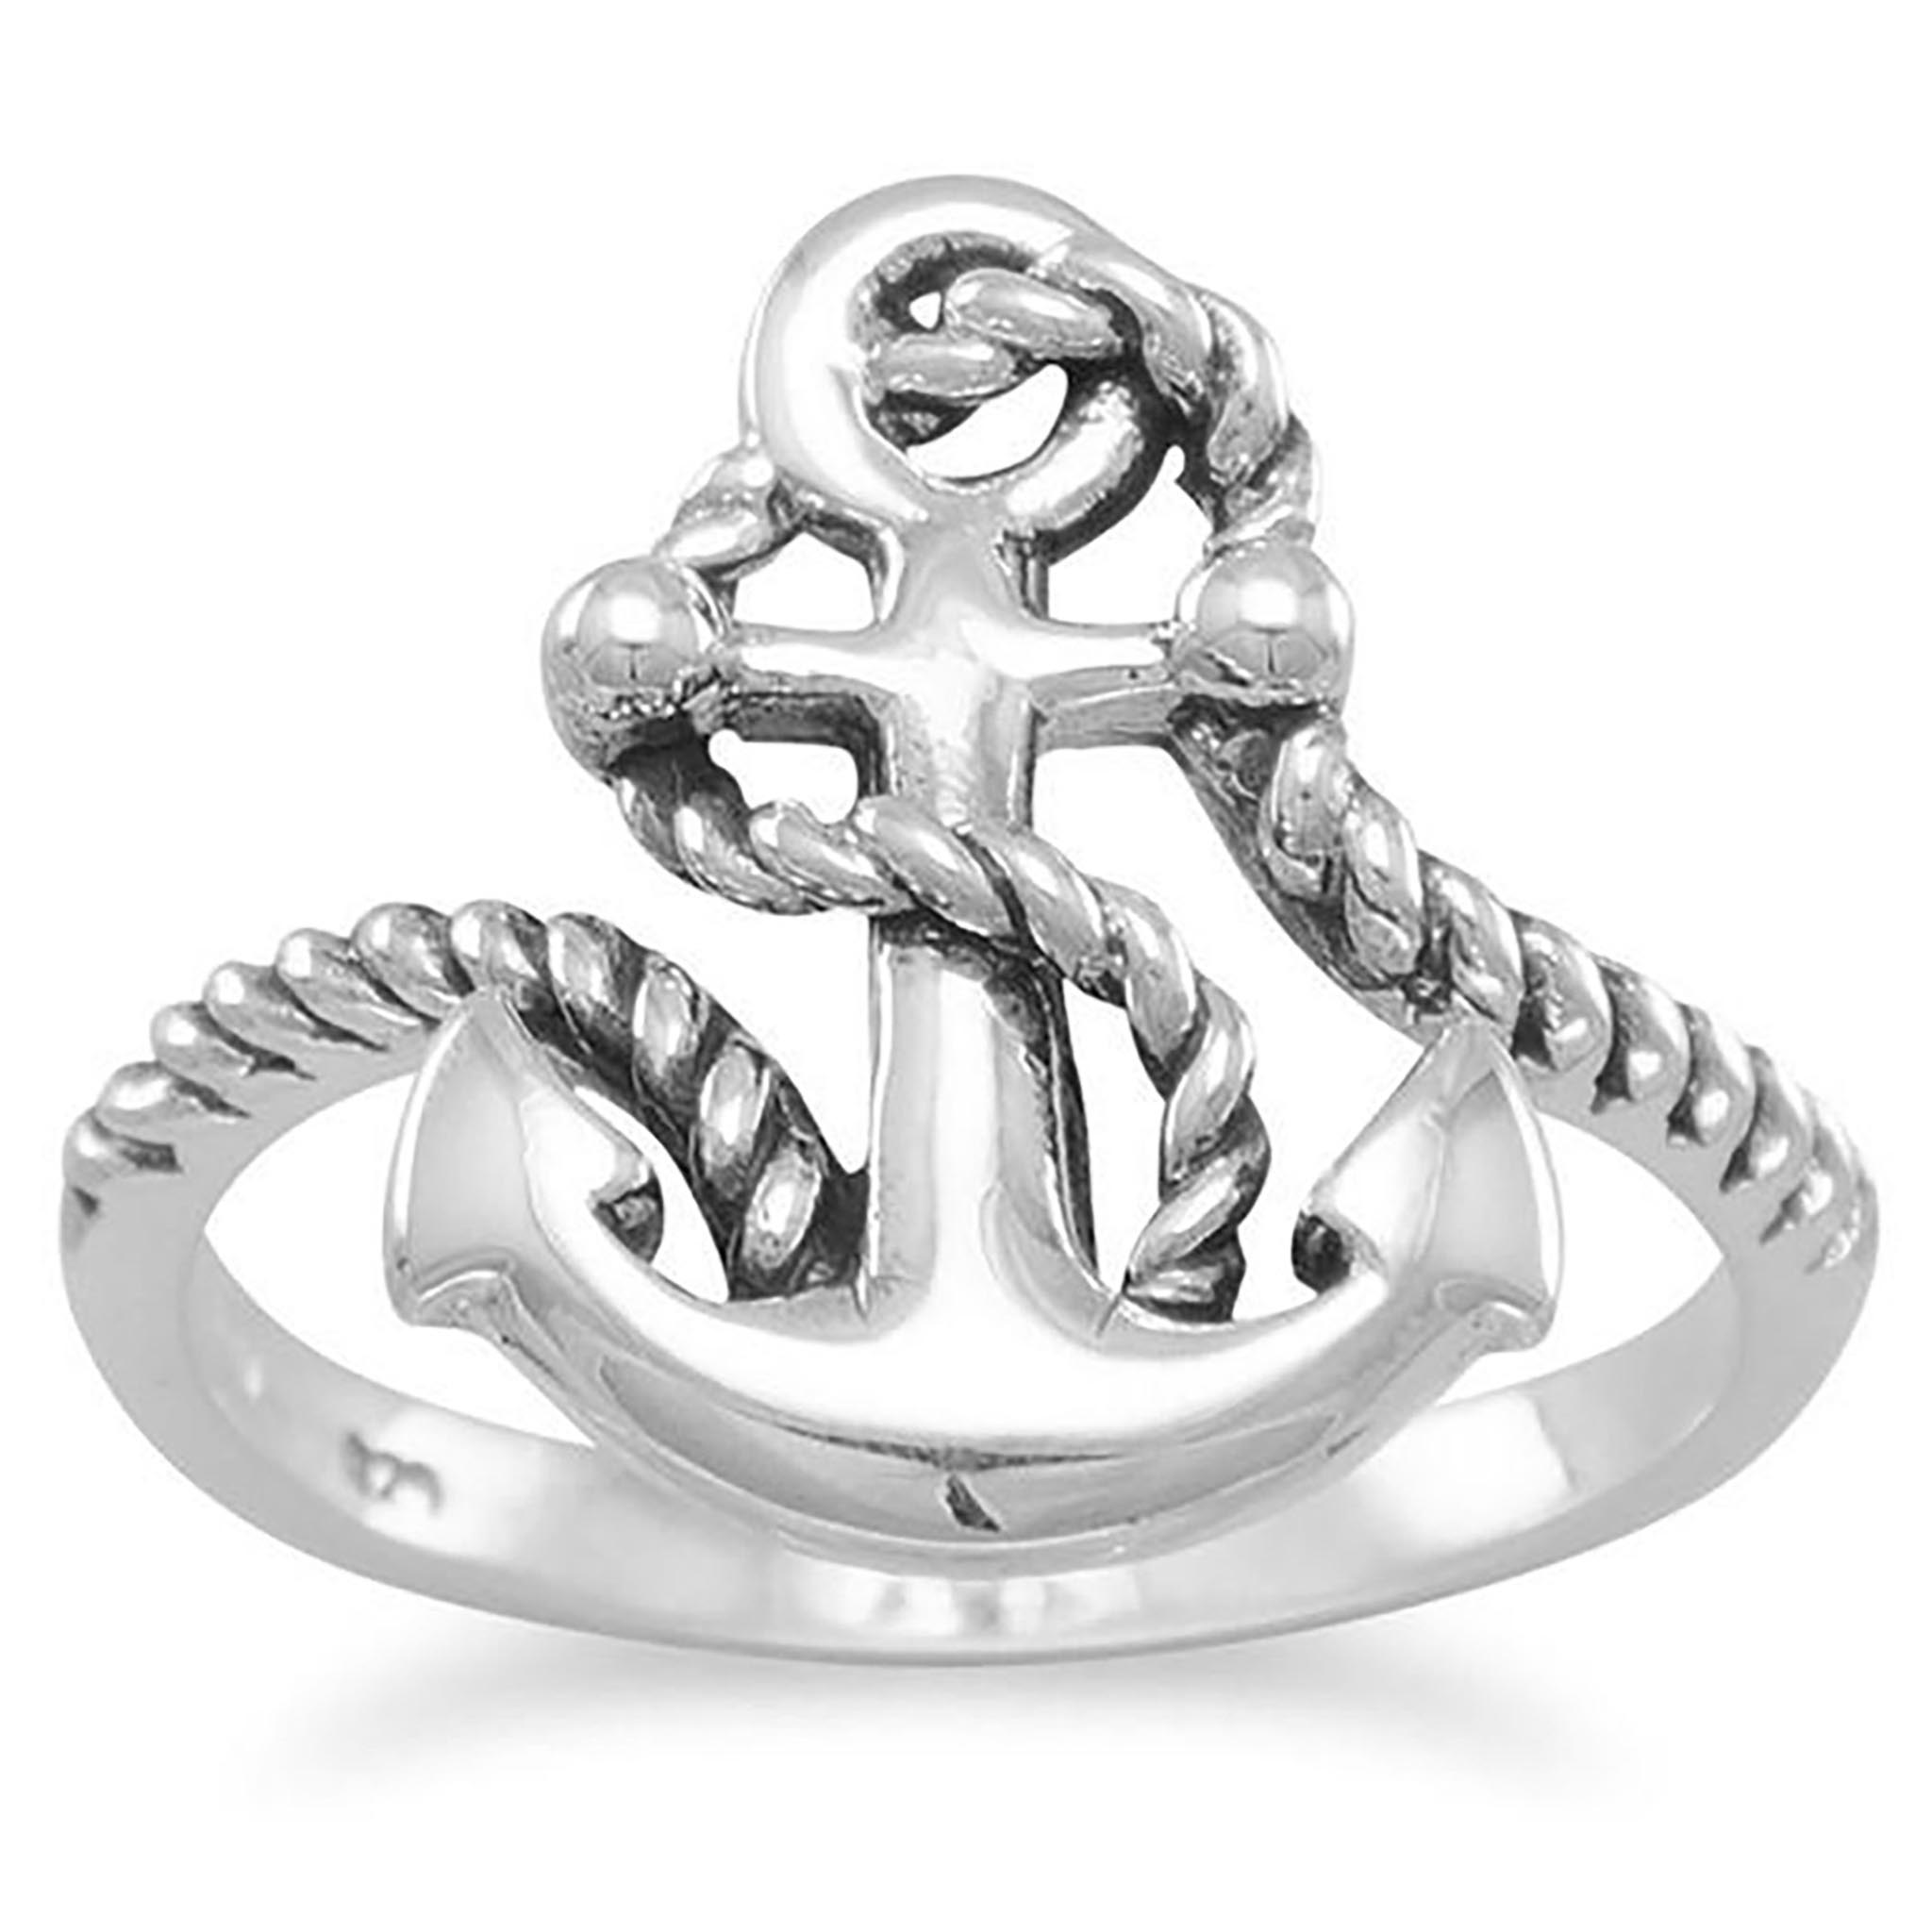 Rope and Anchor Design Ring